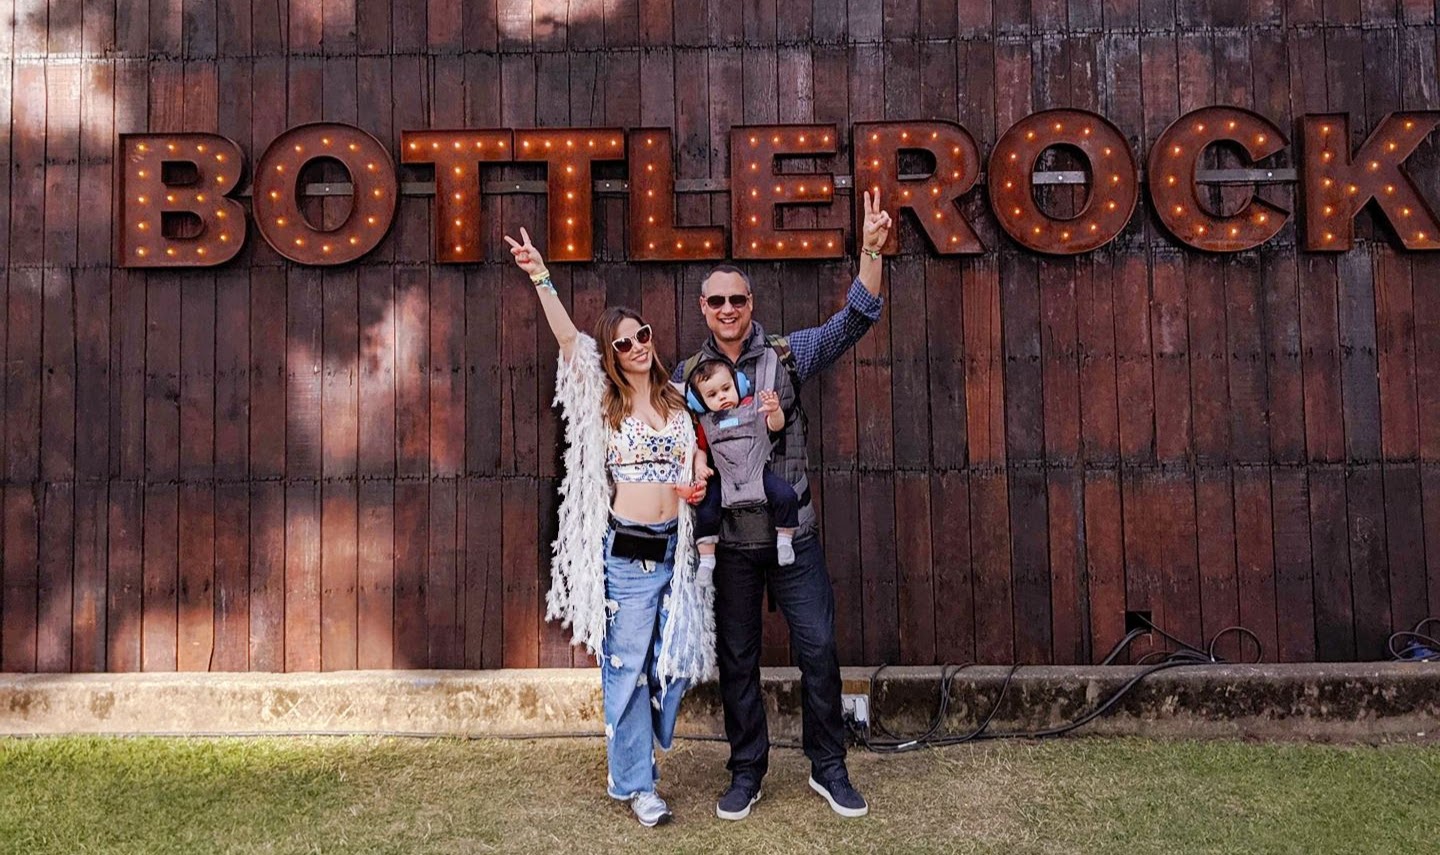 5 Reasons I’m Excited for BottleRock Napa Valley 2020